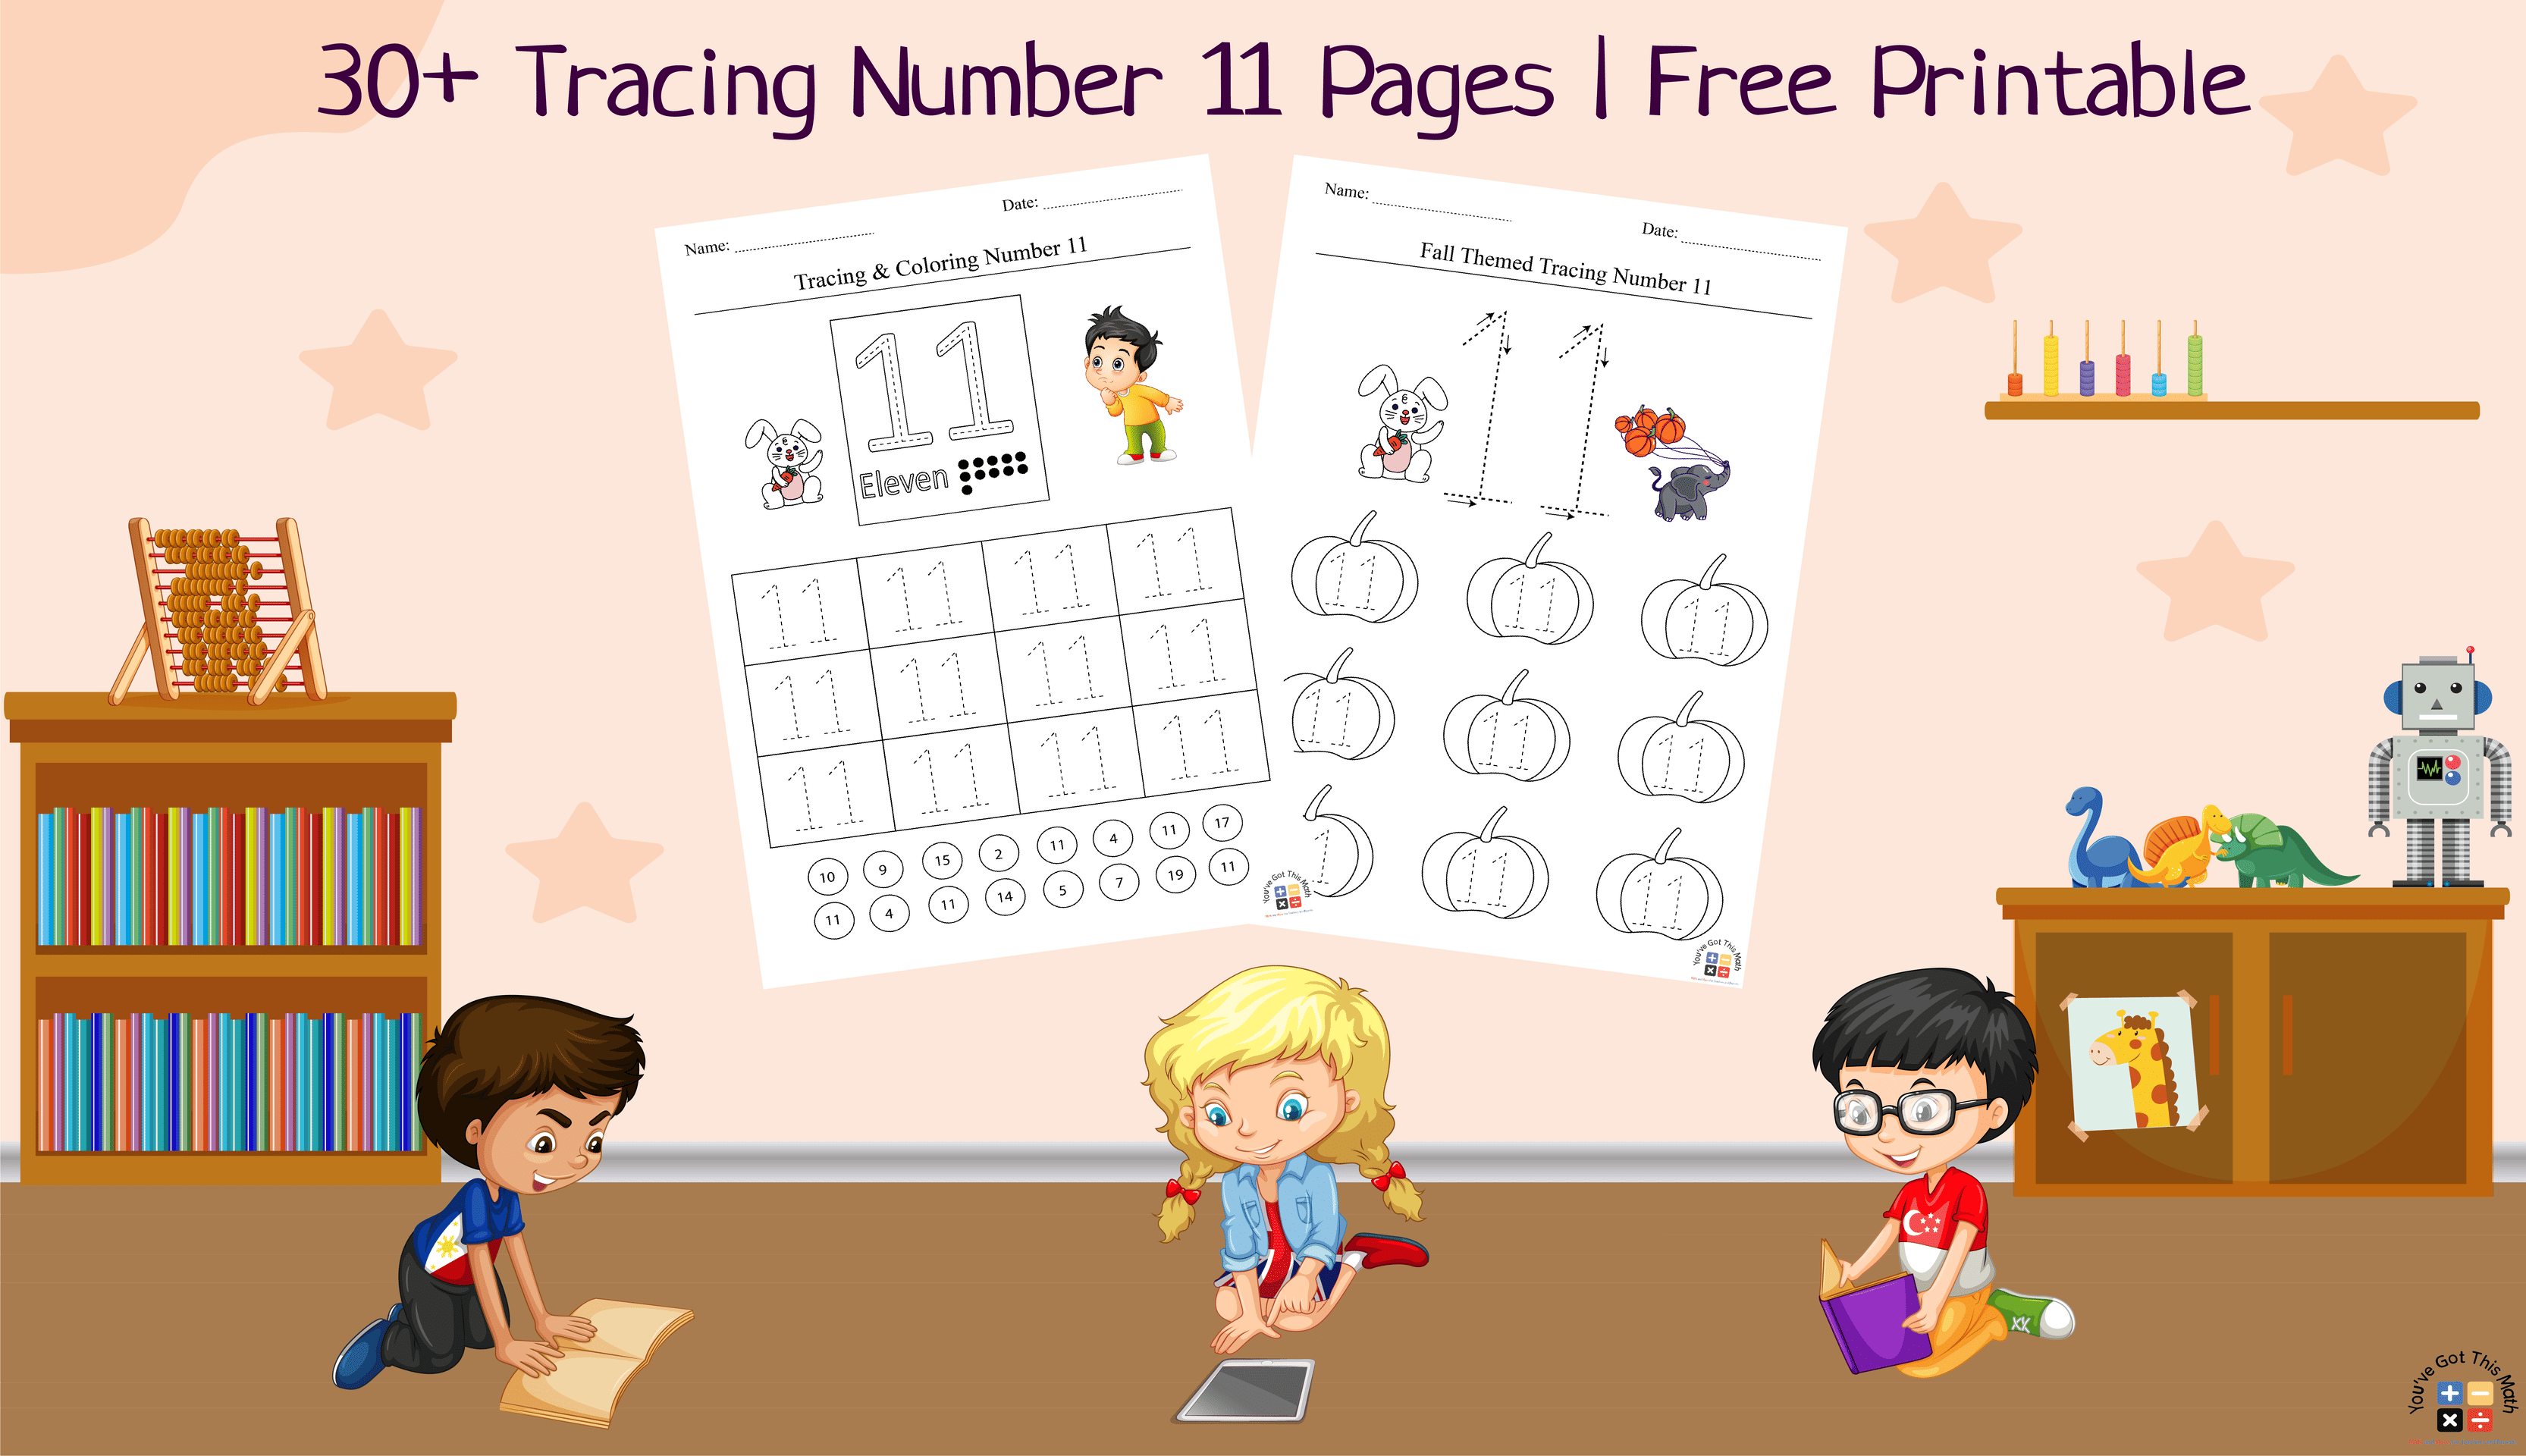 30+ Tracing Number 11 Pages | Free Printable